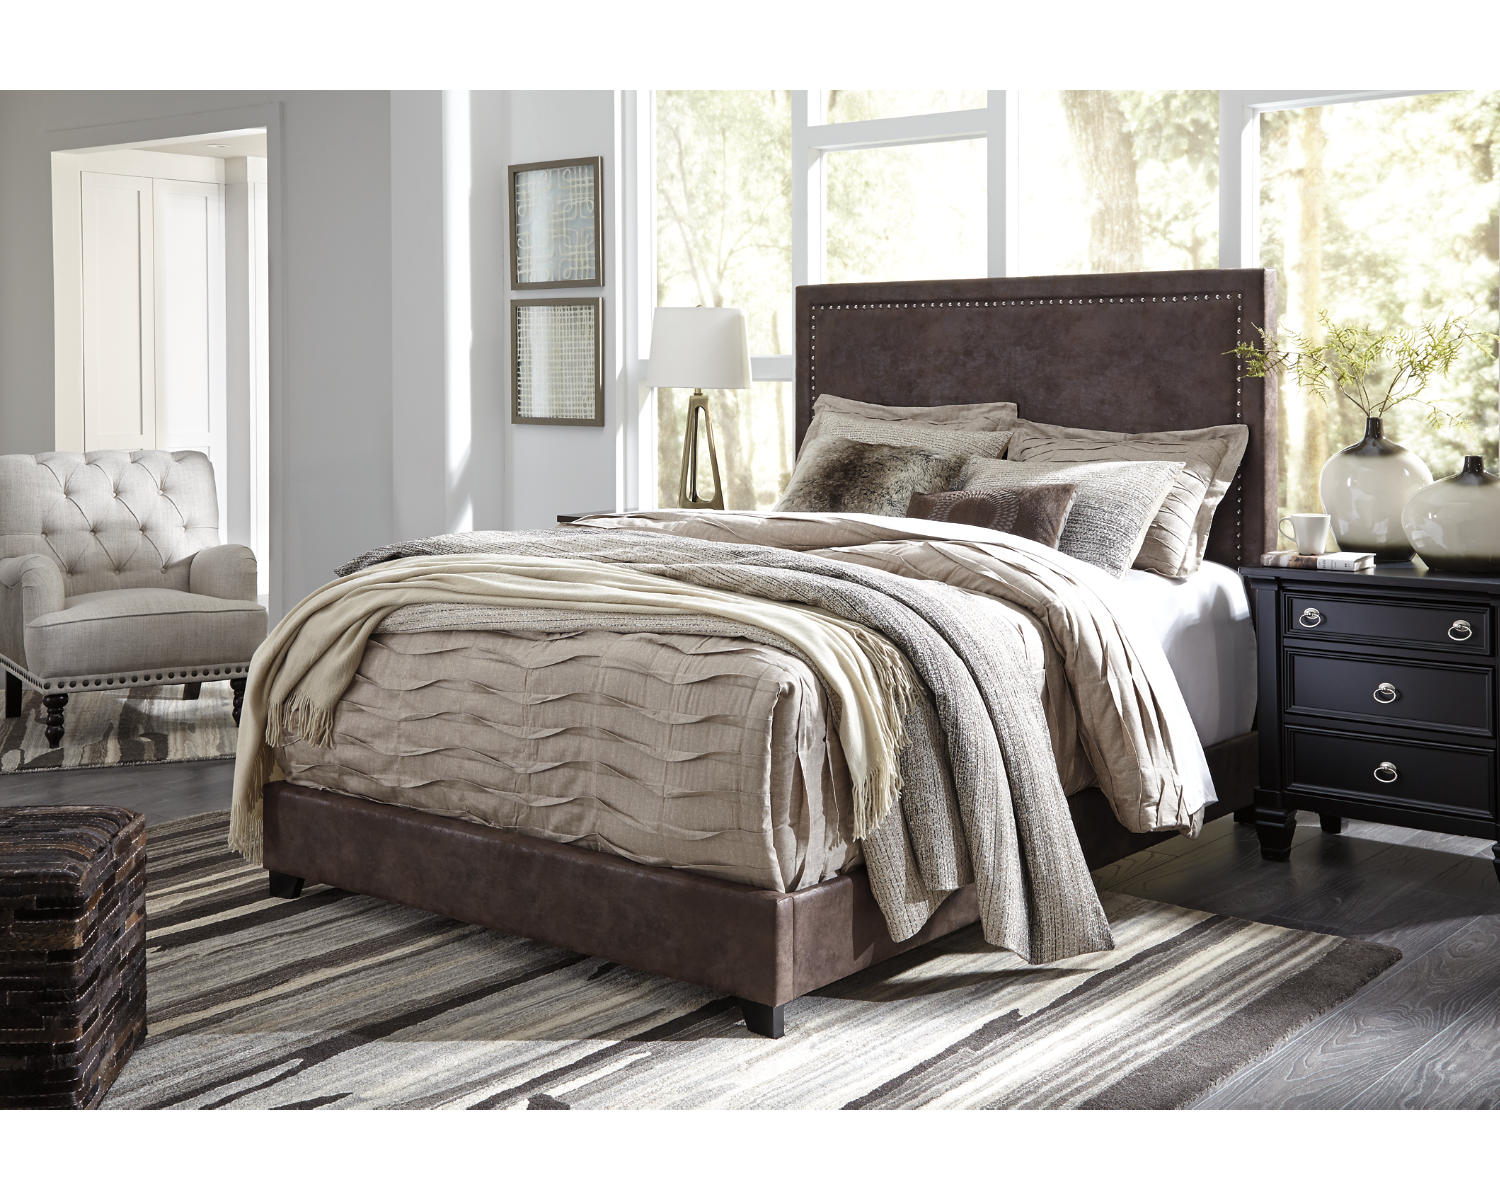 Signature Design by Ashley Dolante Contemporary Faux Leather Upholstered Platform Bed, Queen, Brown - image 4 of 8